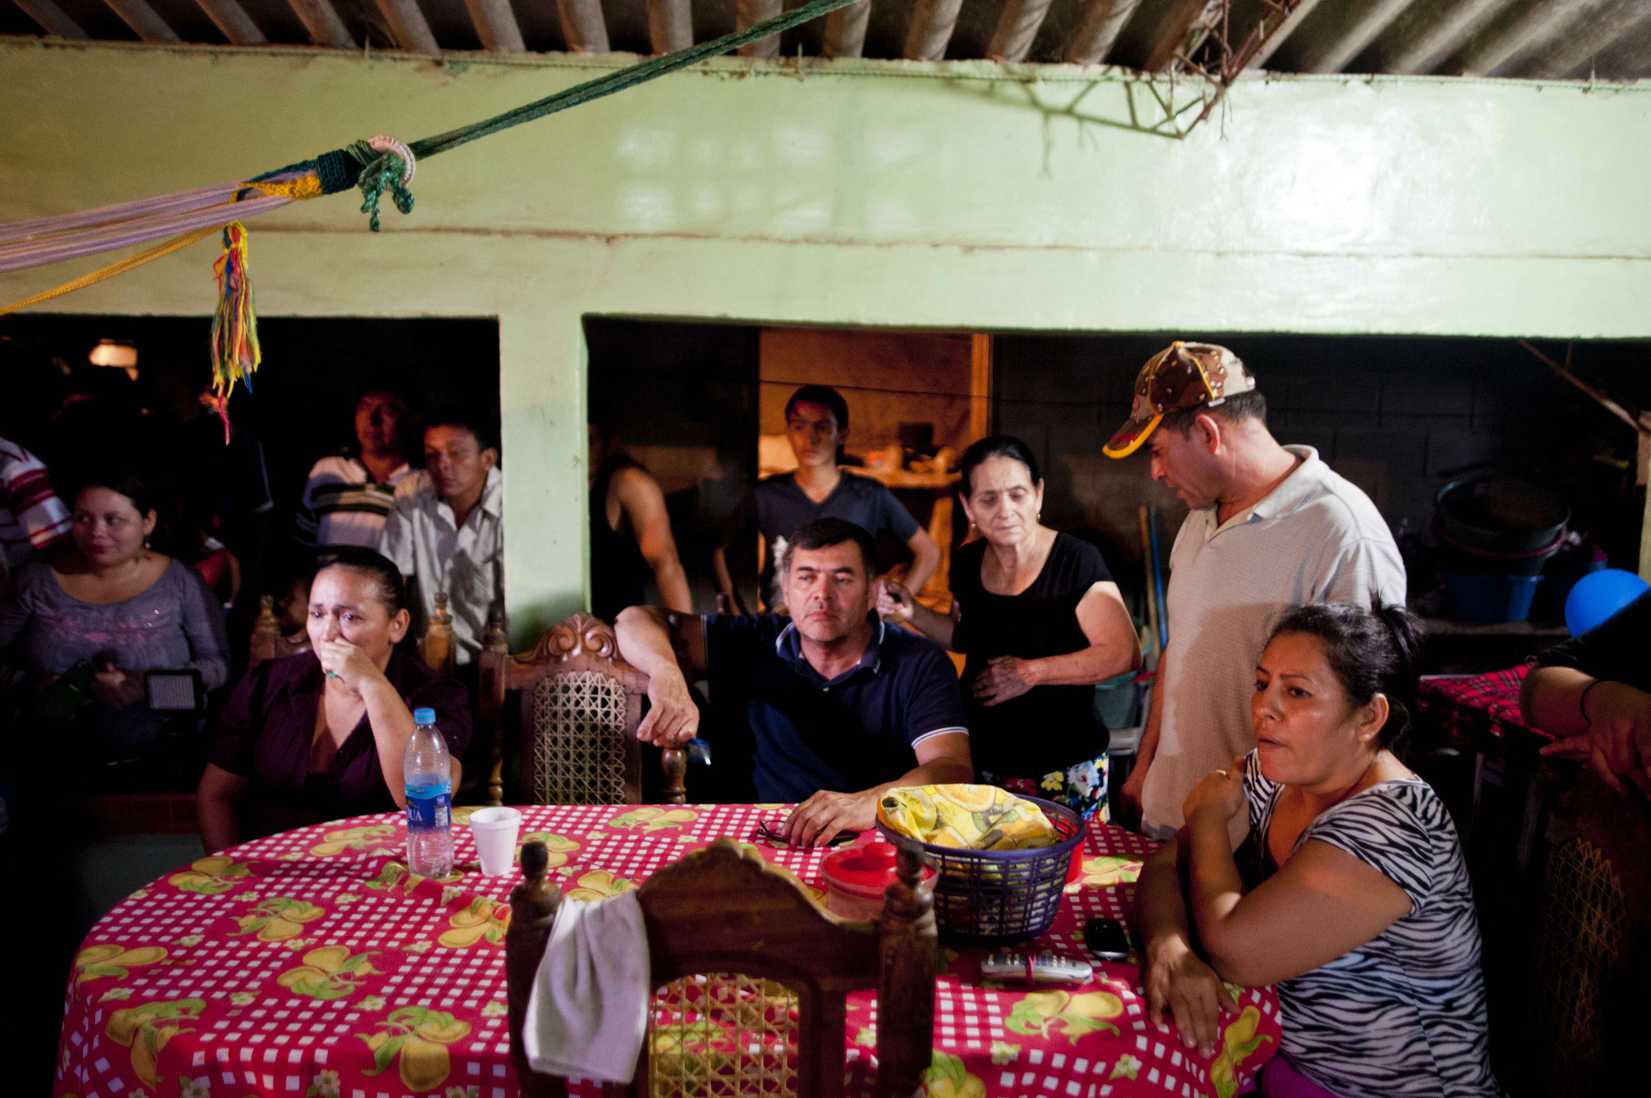 Pacific castaway Jose Salvador Alvarenga's family watch the broadcast of his arrival at their house in Garita Palmera 118 km. west from San Salvador, El Salvador, on February 11, 2014. (Jose Cabezas—AFP/Getty Images)